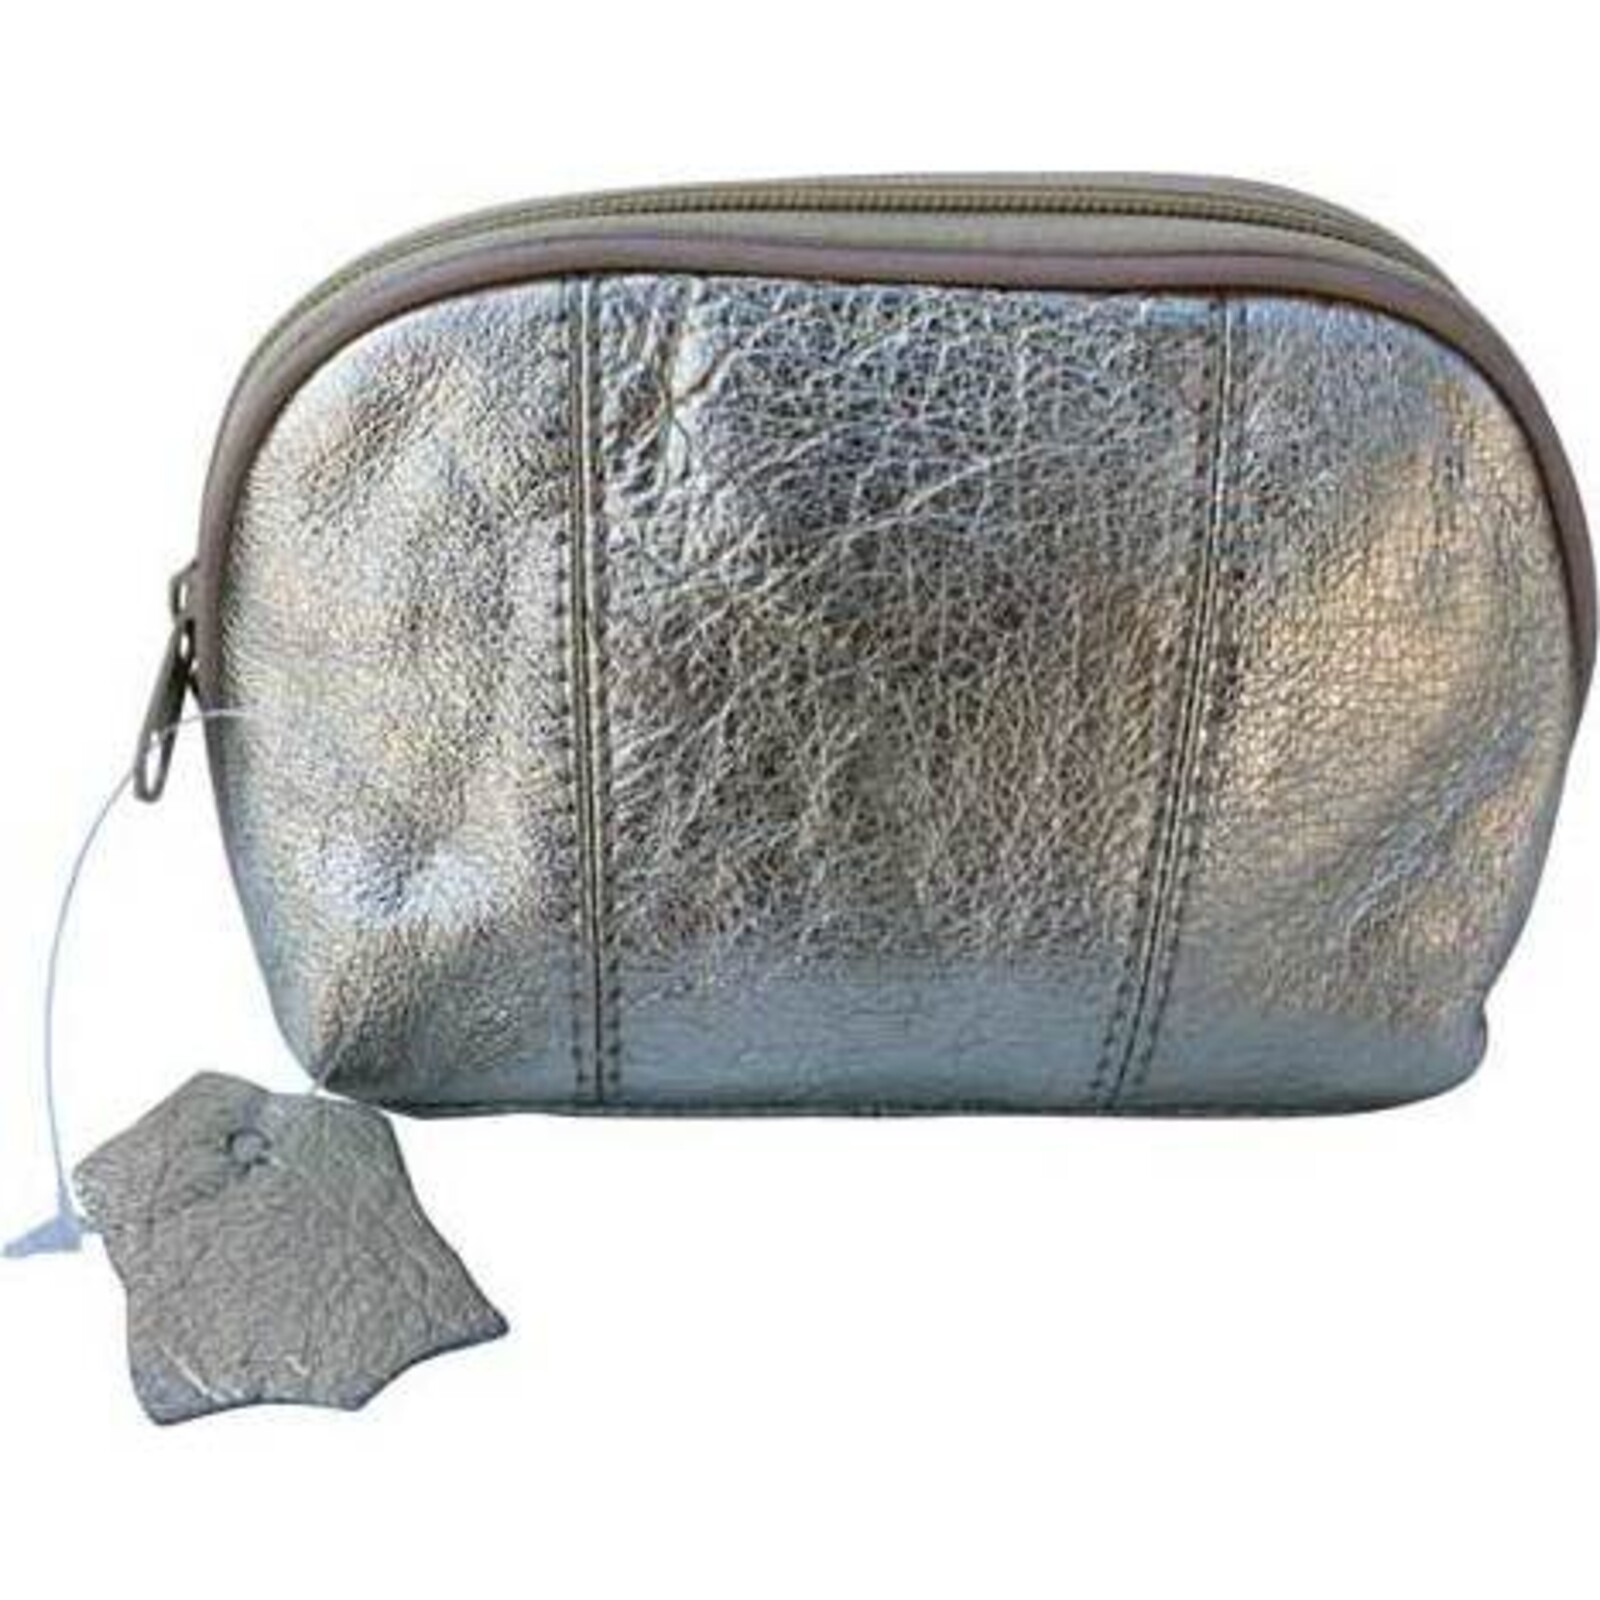 Leather Pouch Purse - Silver